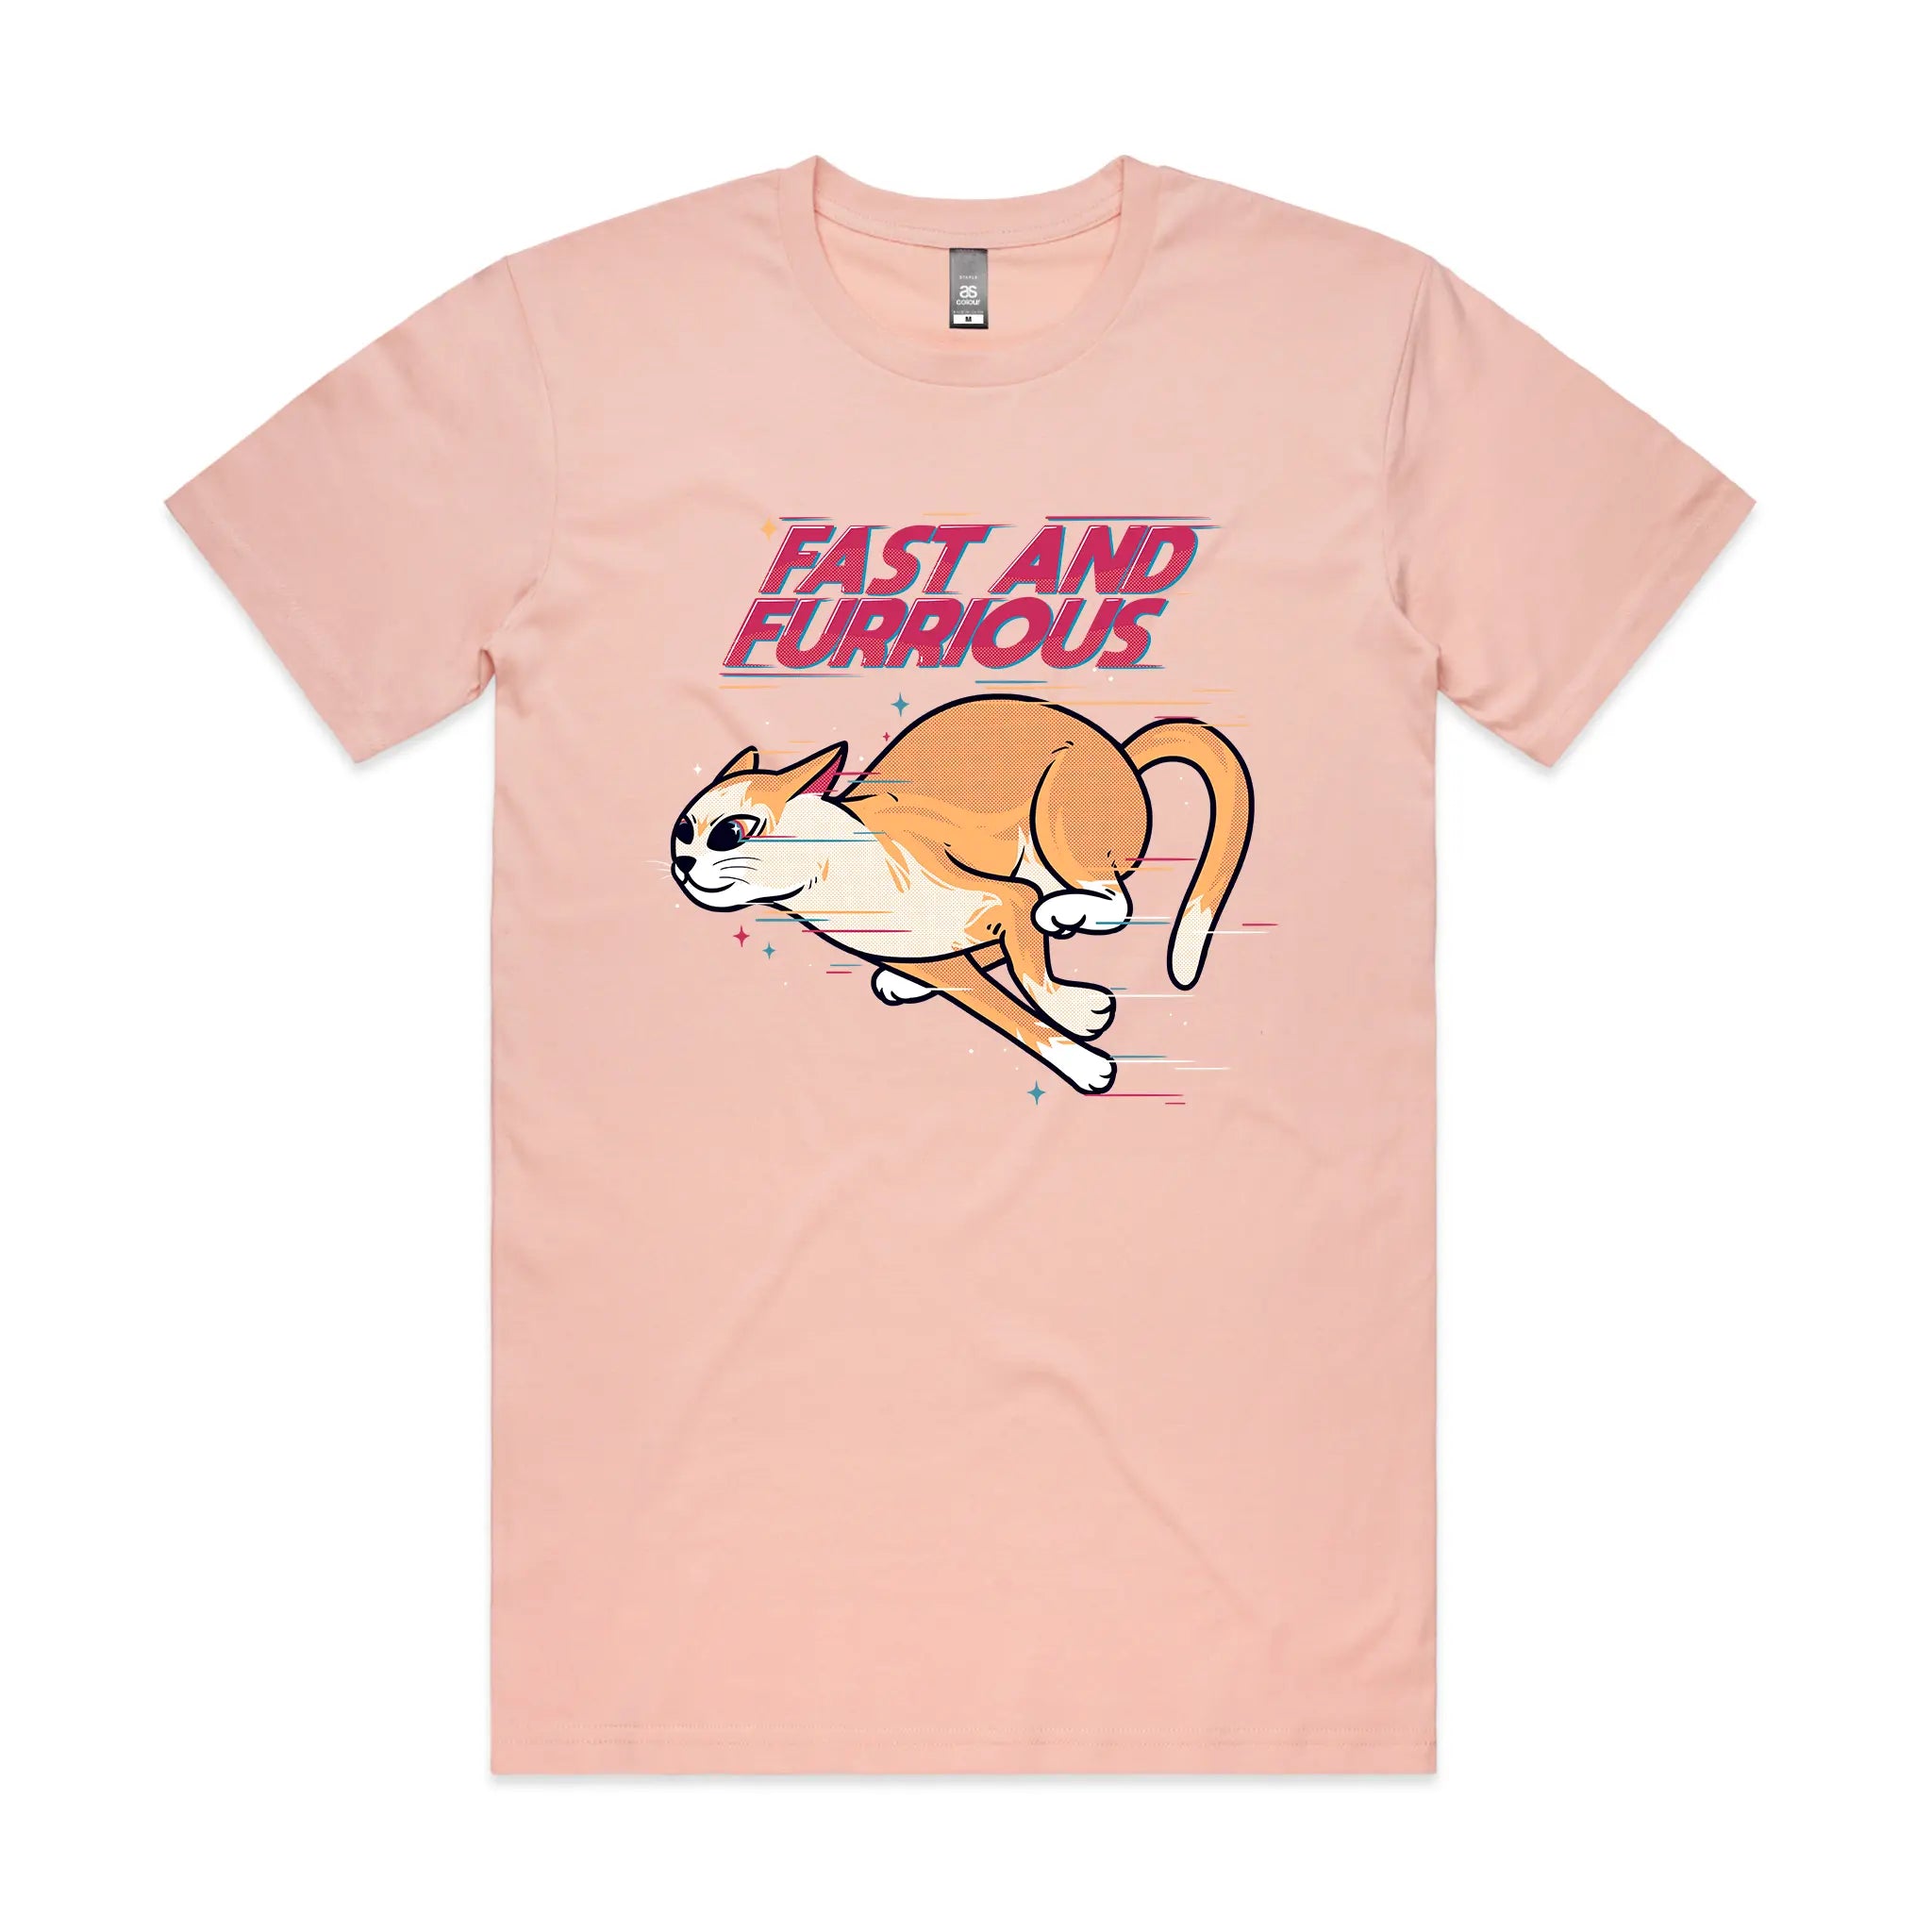 Fast and Furrious Tee